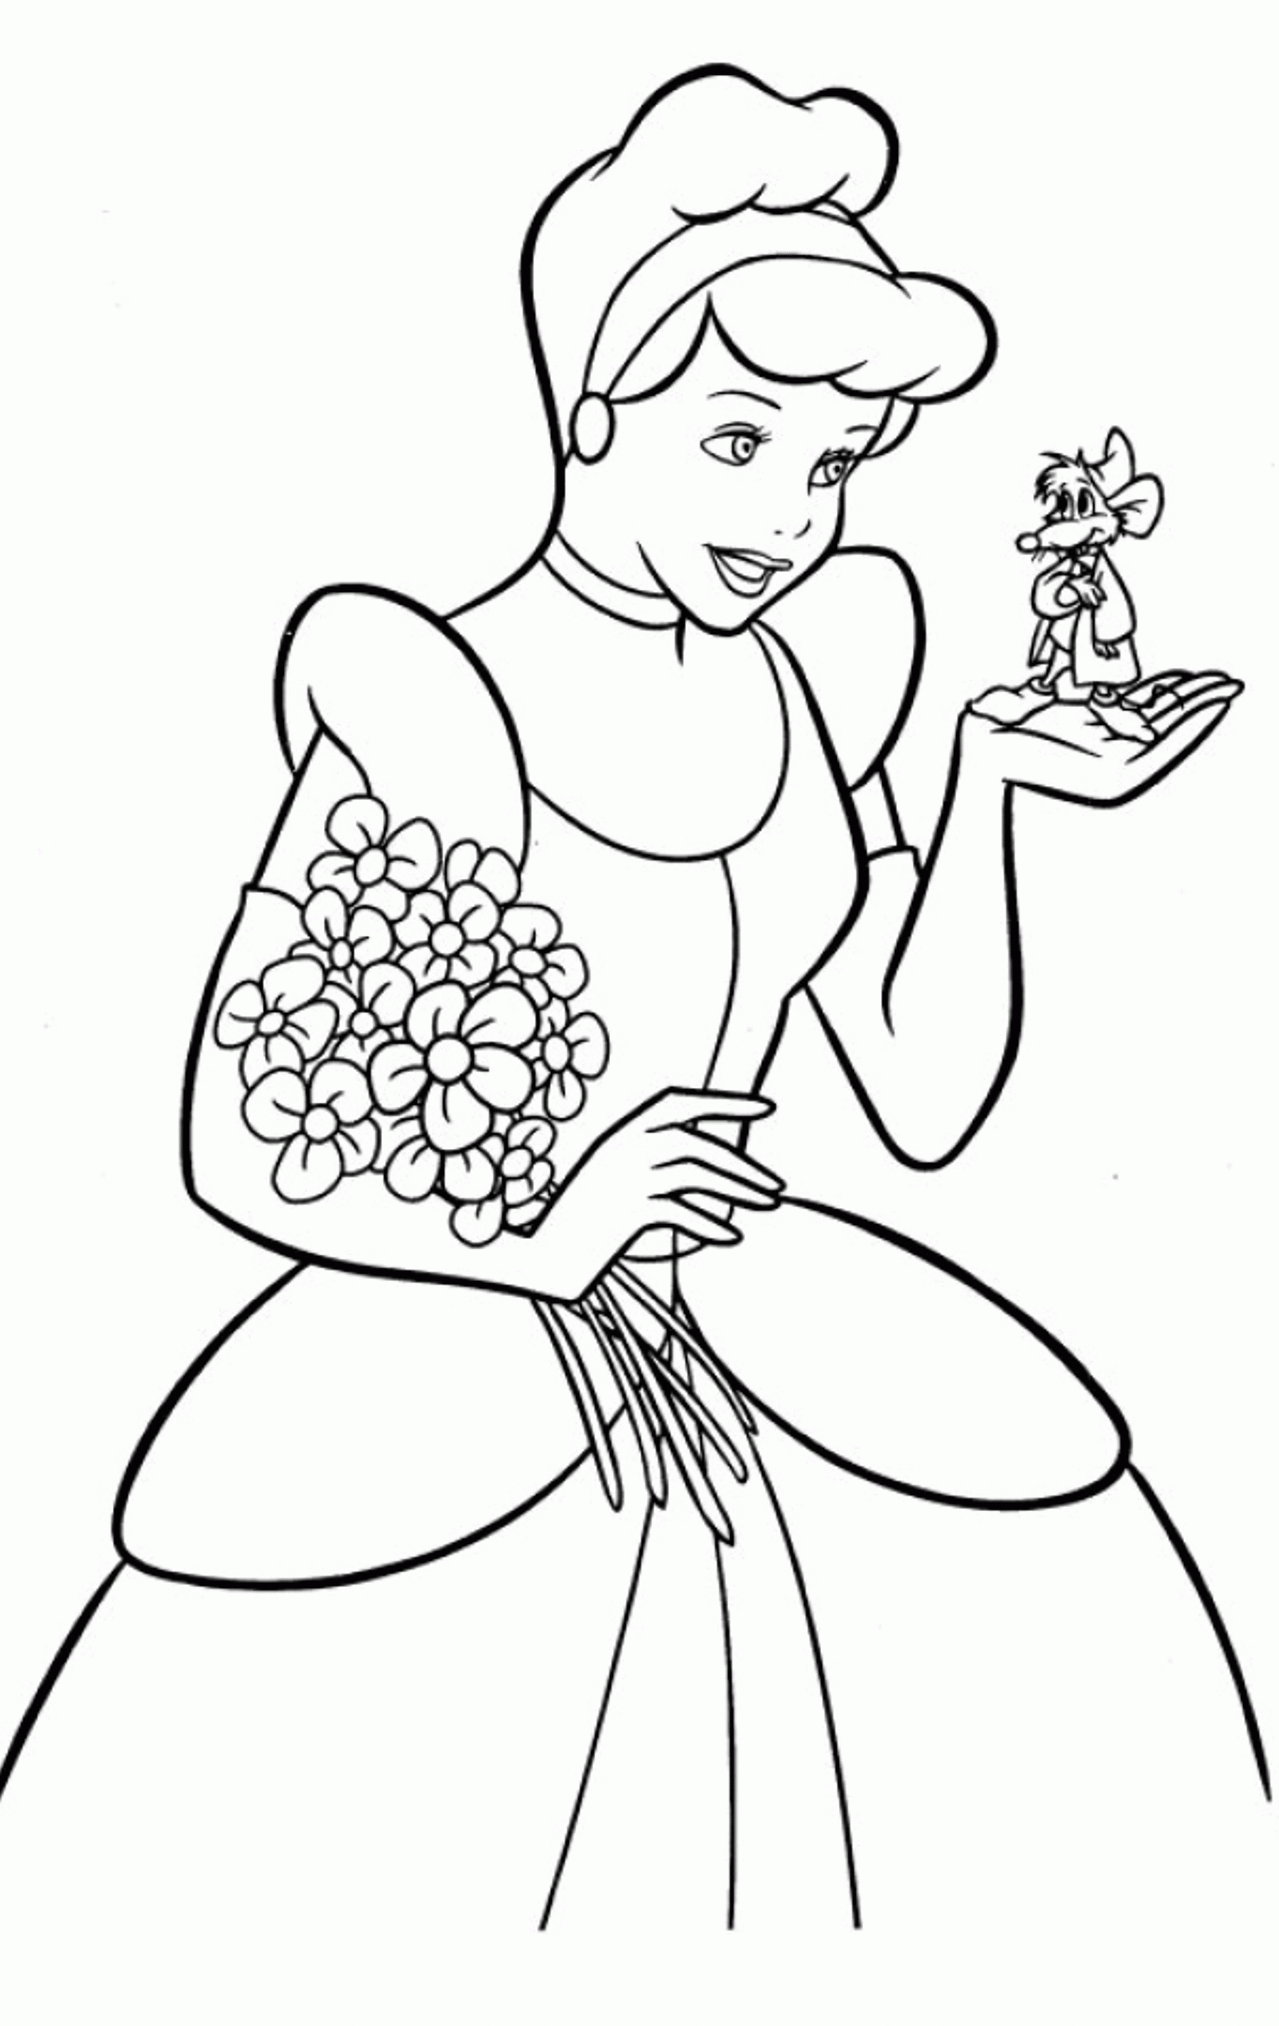 Cinderella Coloring Pages Print - Coloring Home